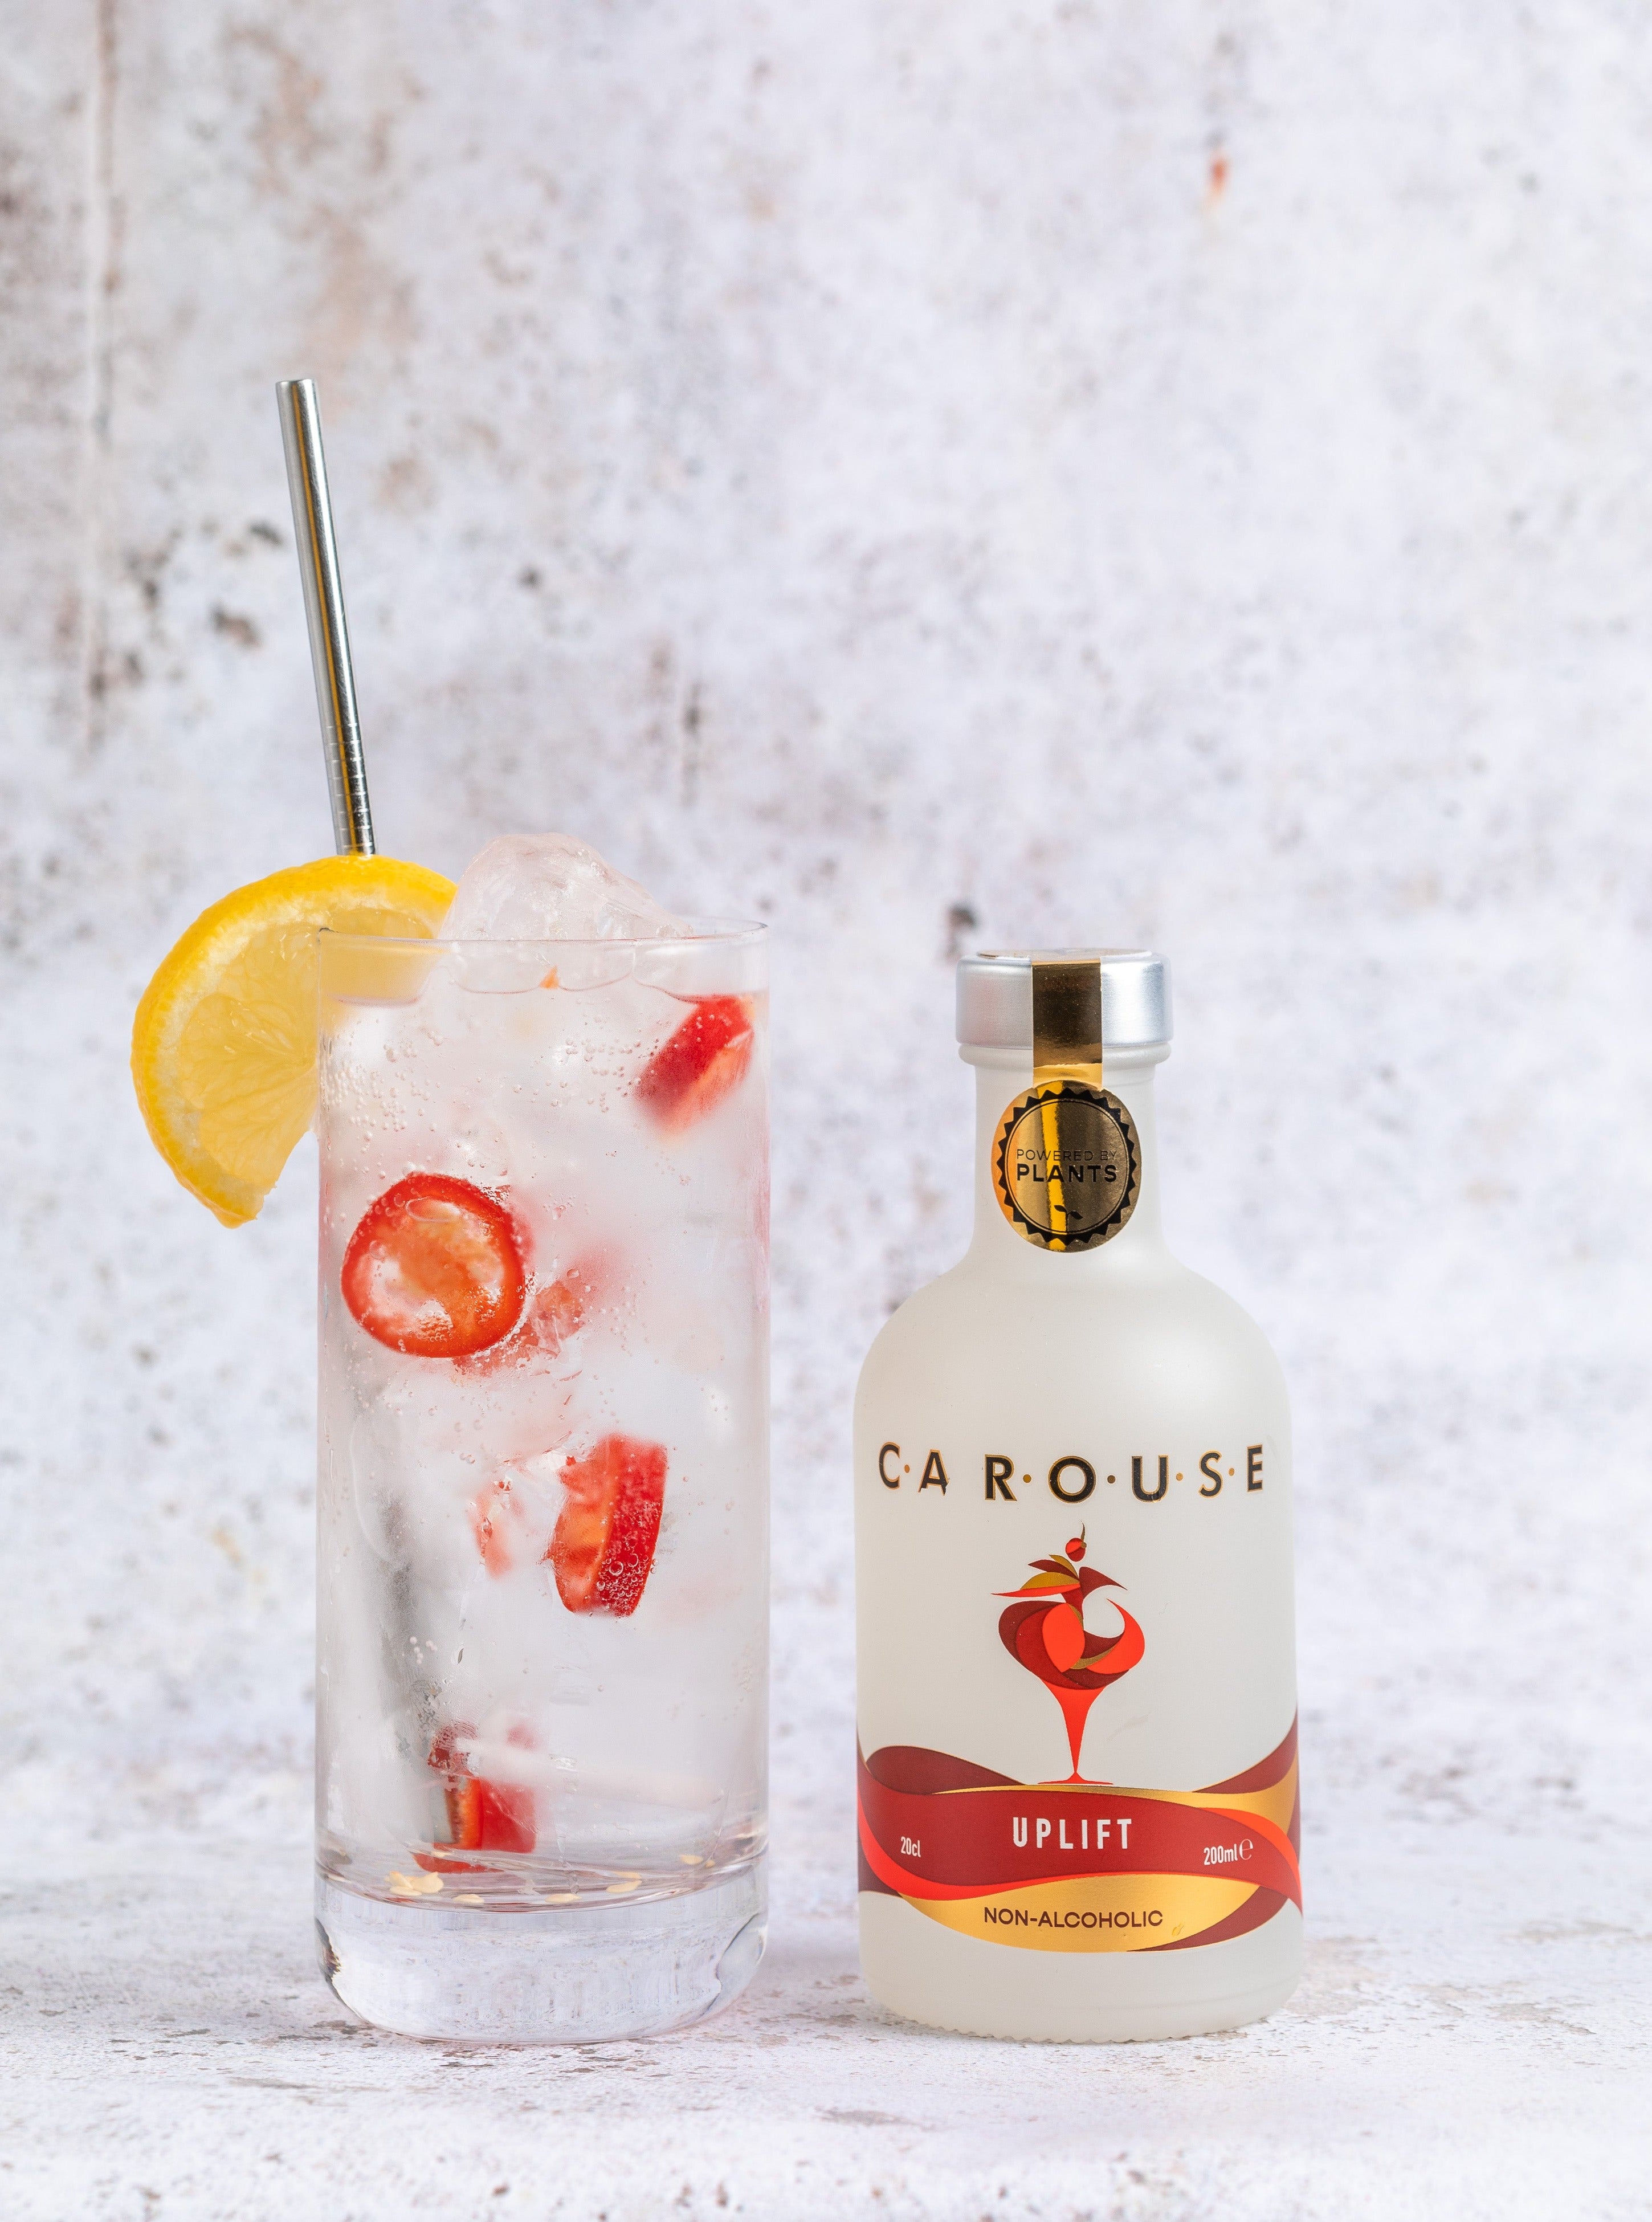 Drink CAROUSE; Re-energise with UPLIFT. A vibrant blend of energising botanicals in an alcoholic free spirit. 200ml bottle.